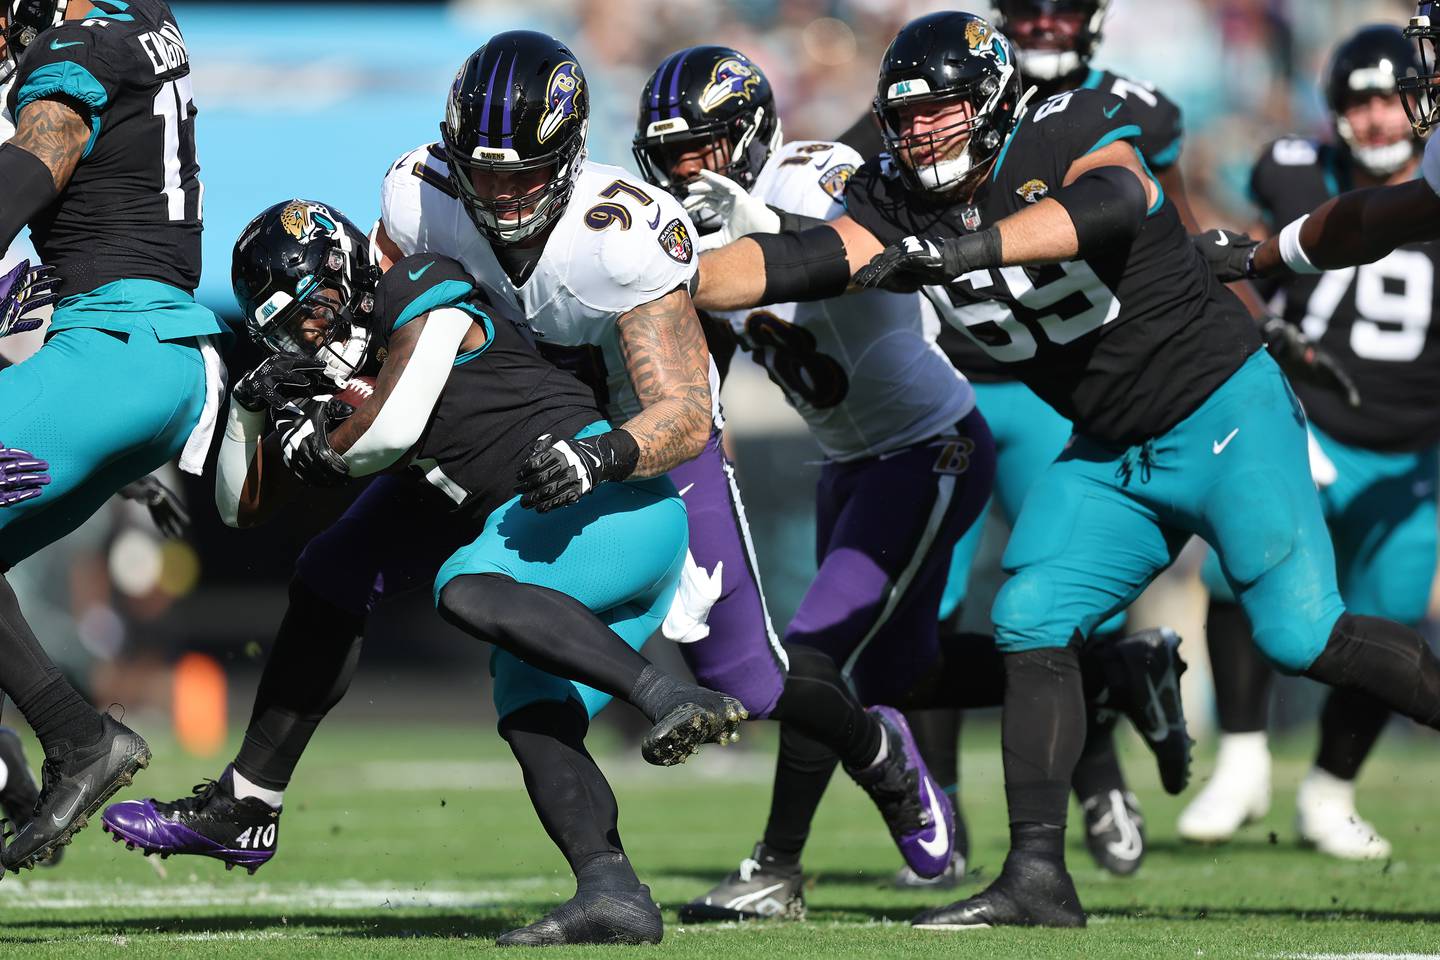 JACKSONVILLE, FLORIDA - NOVEMBER 27: Travis Etienne Jr. #1 of the Jacksonville Jaguars is tackled by Brent Urban #97 of the Baltimore Ravens during the first half at TIAA Bank Field on November 27, 2022 in Jacksonville, Florida.